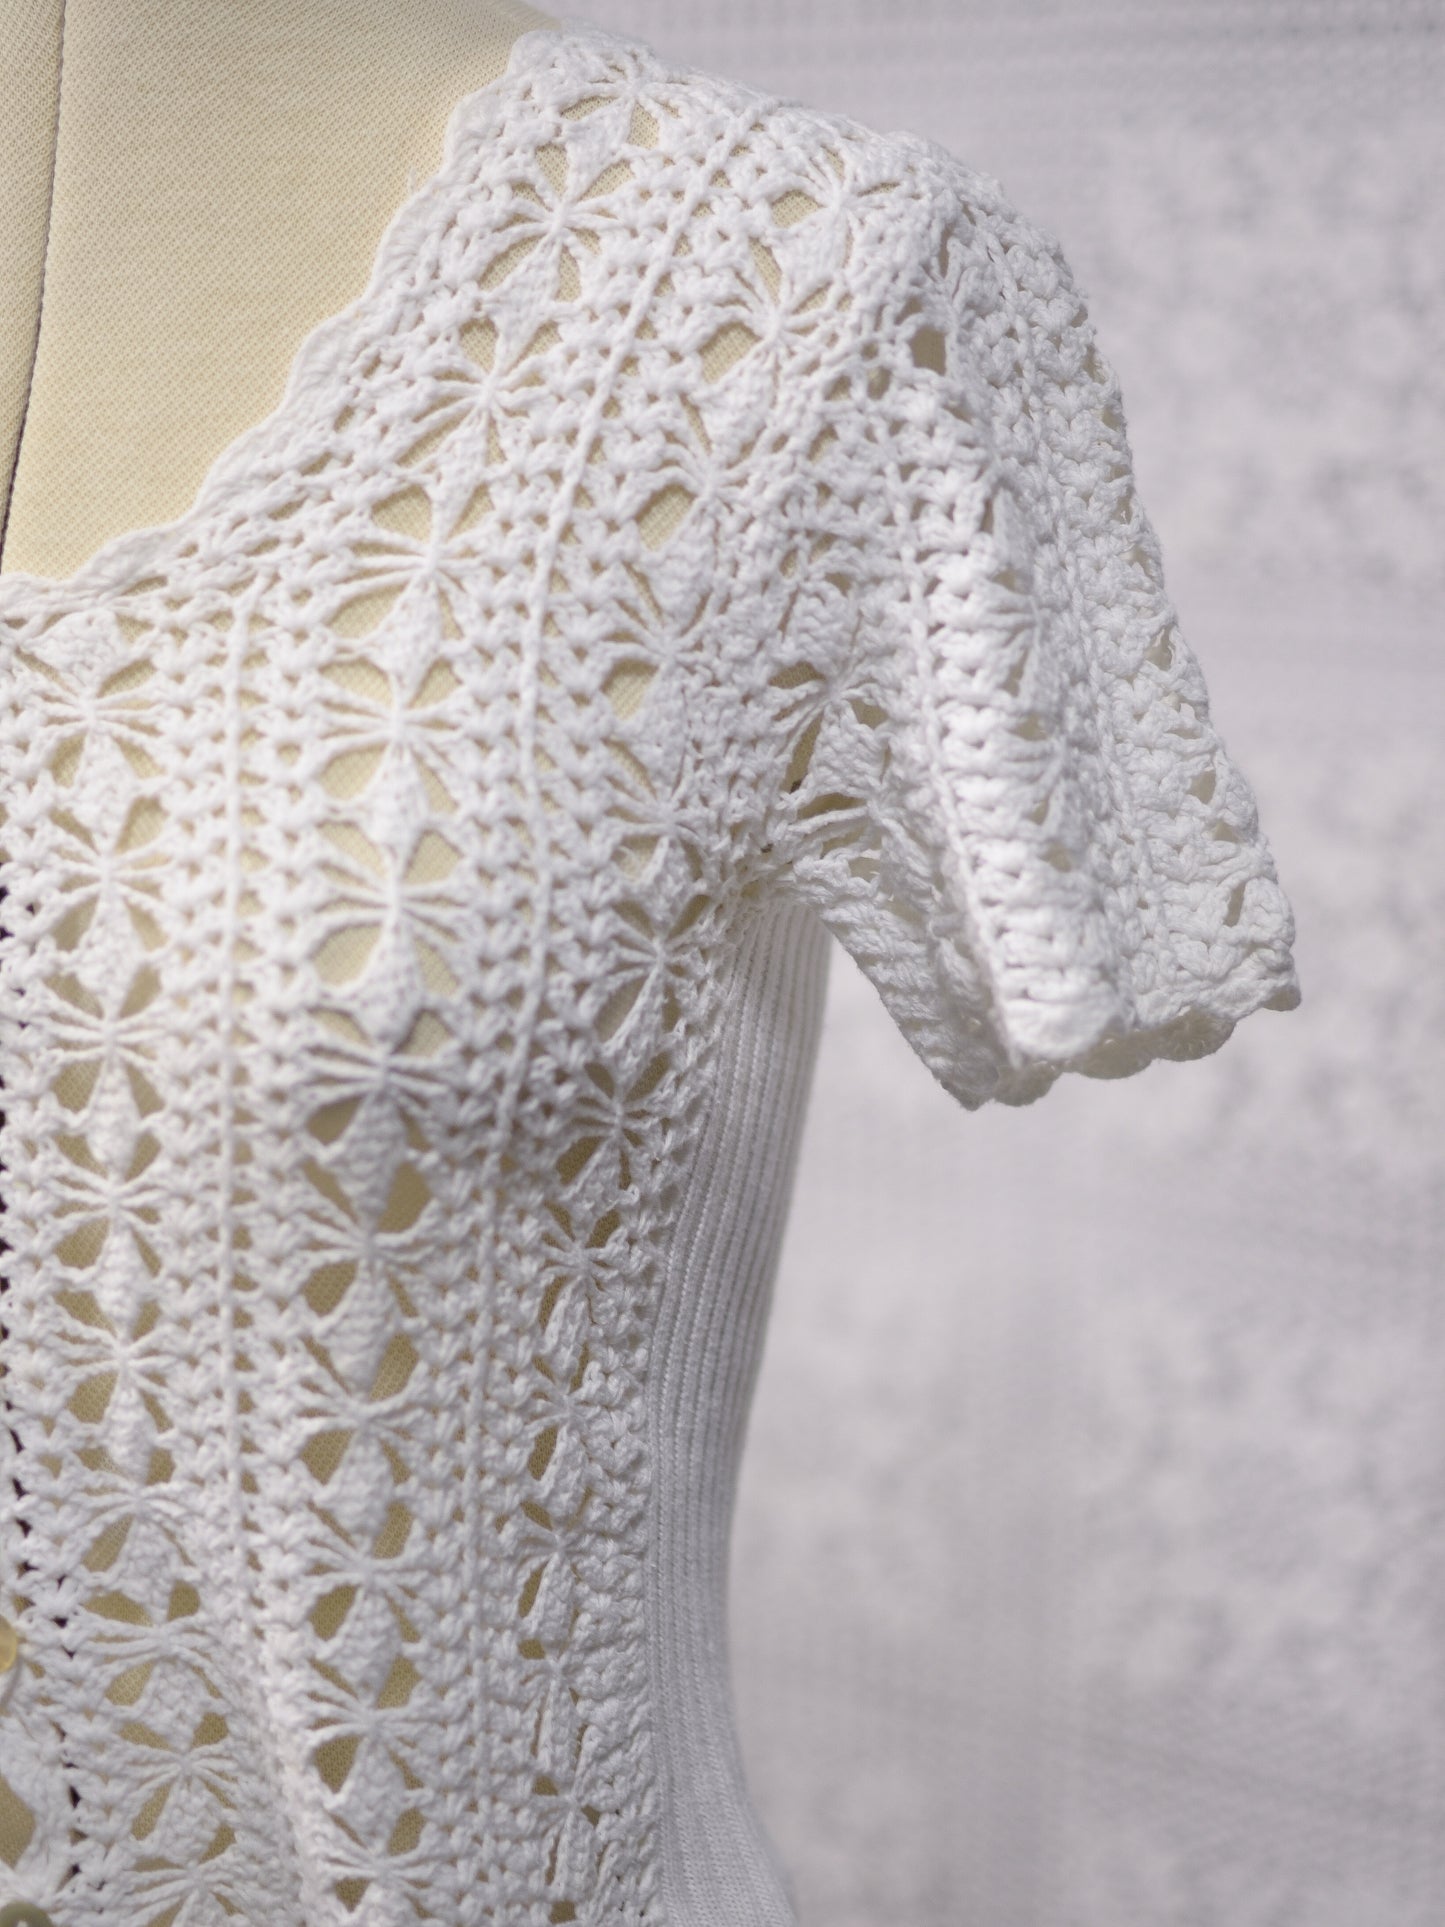 1990s New Look white crocheted short sleeve cardigan with shell buttons